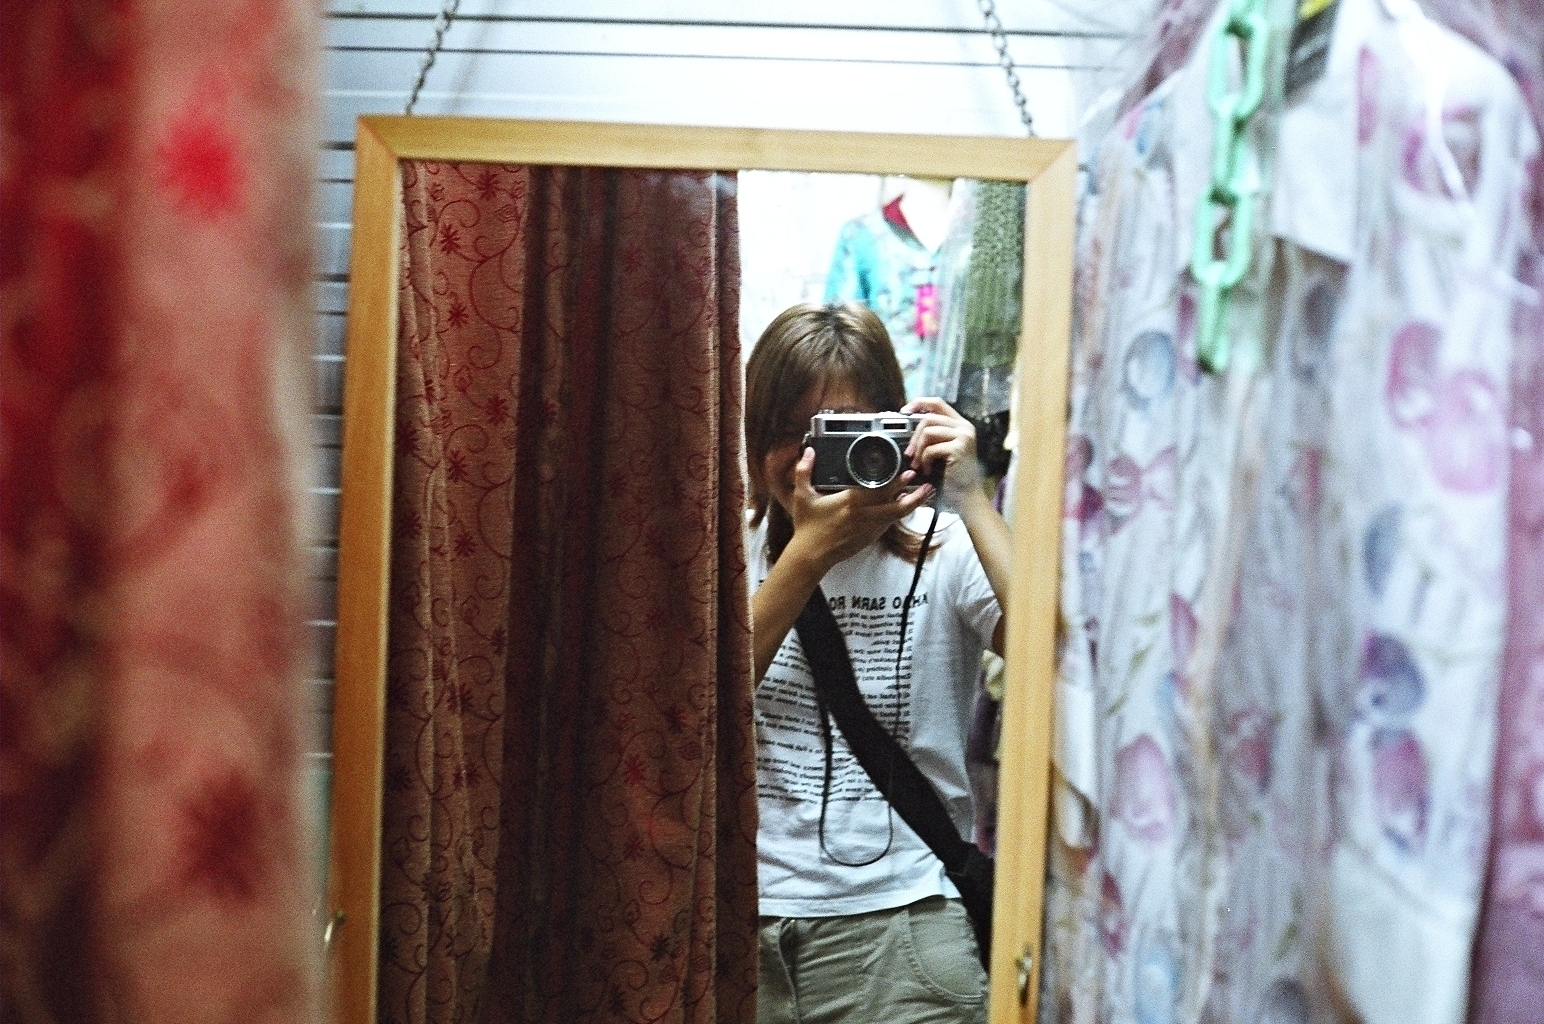 a person taking a photo in the mirror in an old fashioned changing room